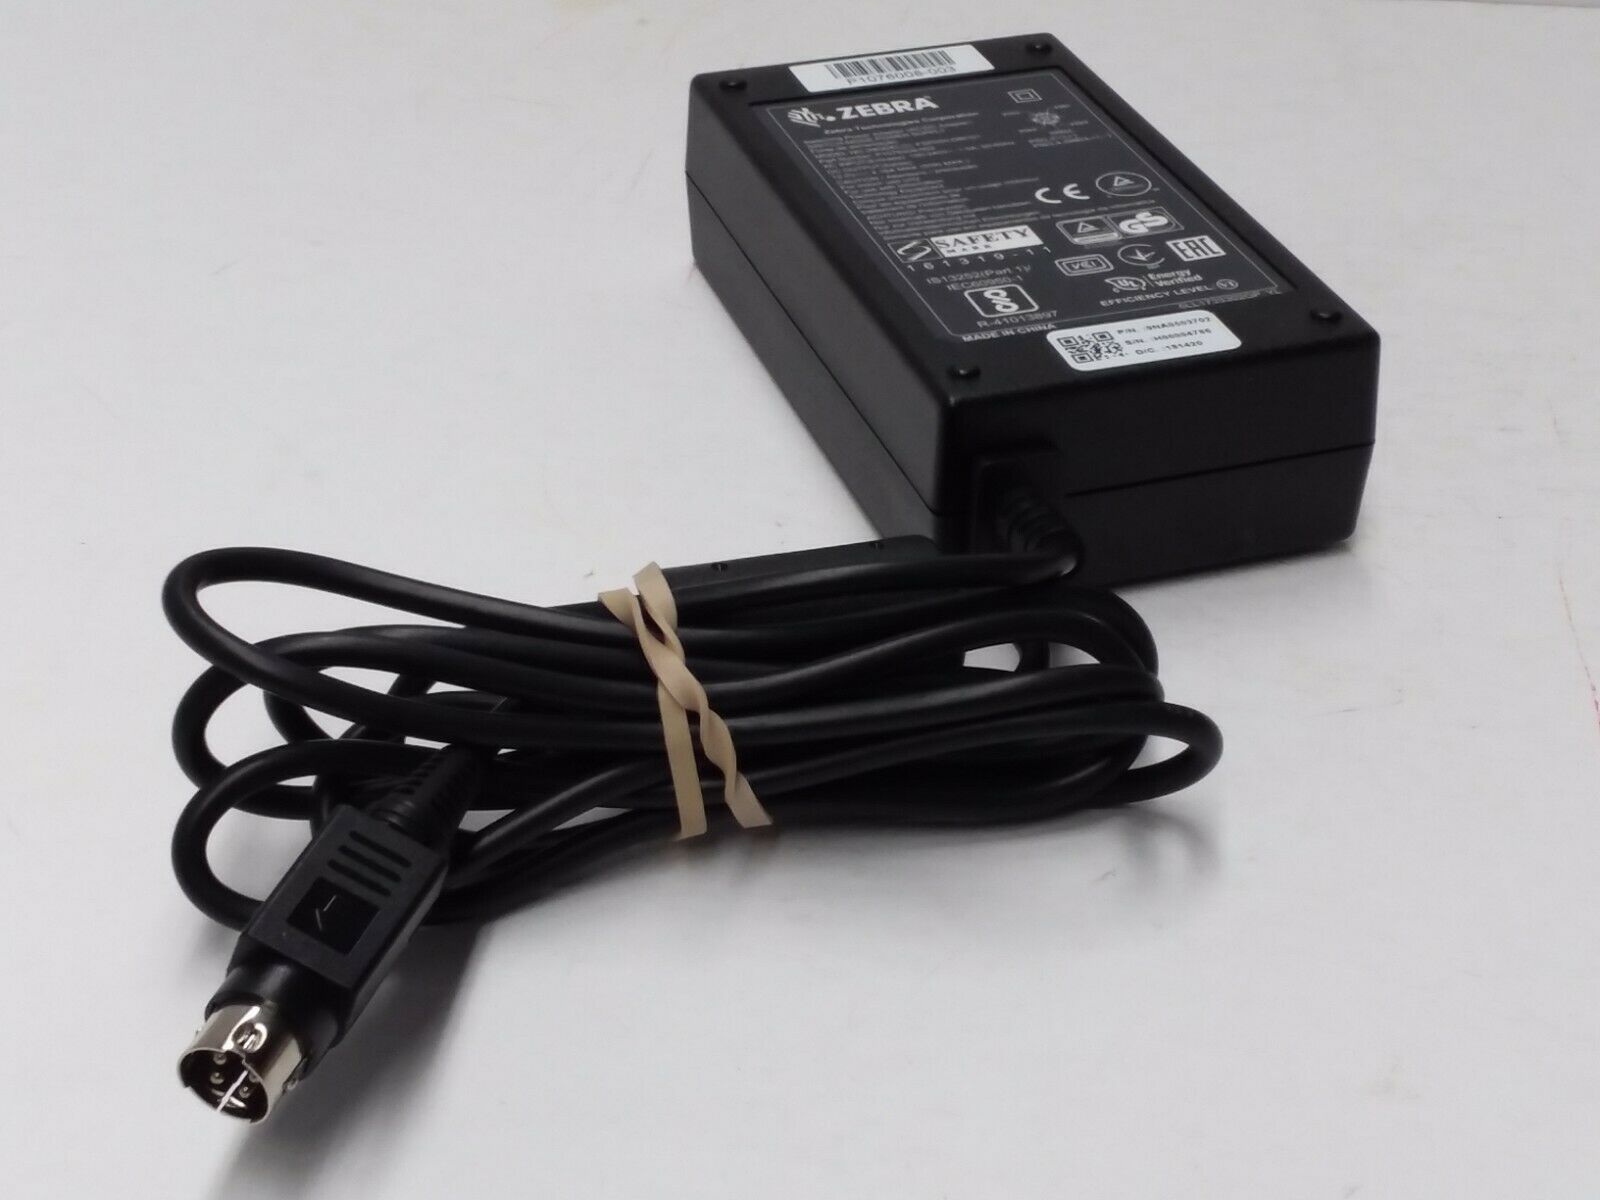 NEW ZEBRA FSP050-DBCD1 12V 4.16A P1076008-003 AC DC POWER SUPPLY ADAPTER 4pin for PRINTER